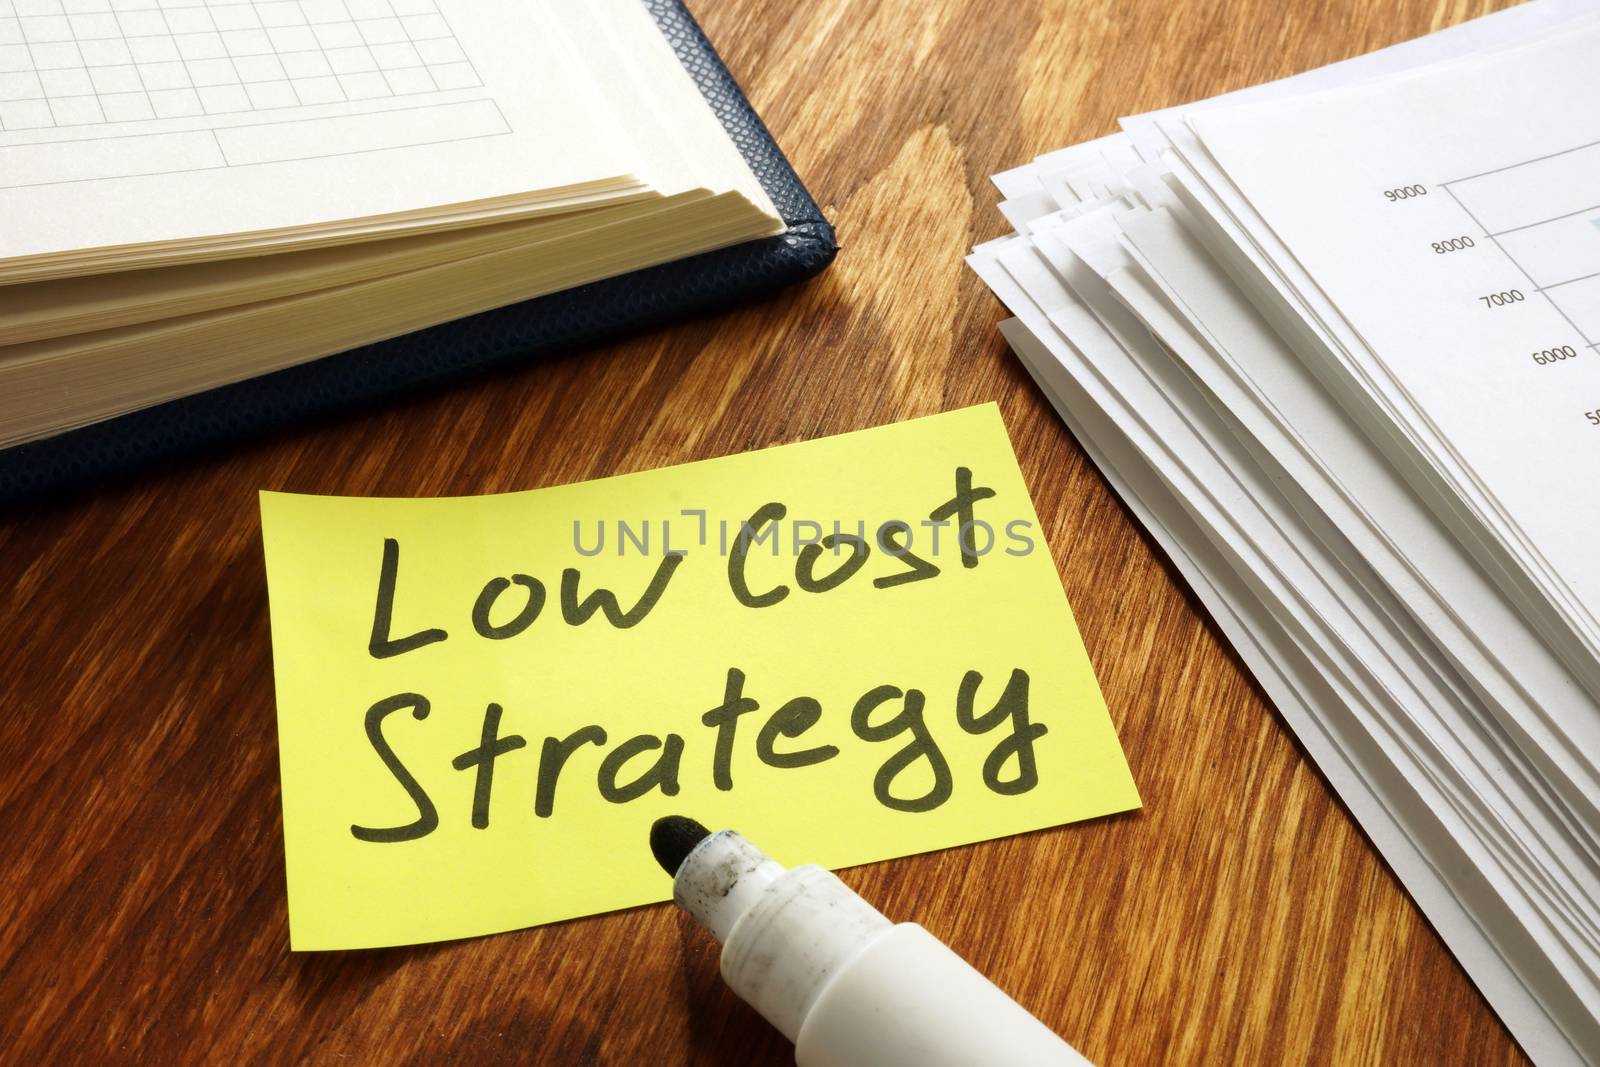 Low cost strategy sign and stack of papers. by designer491